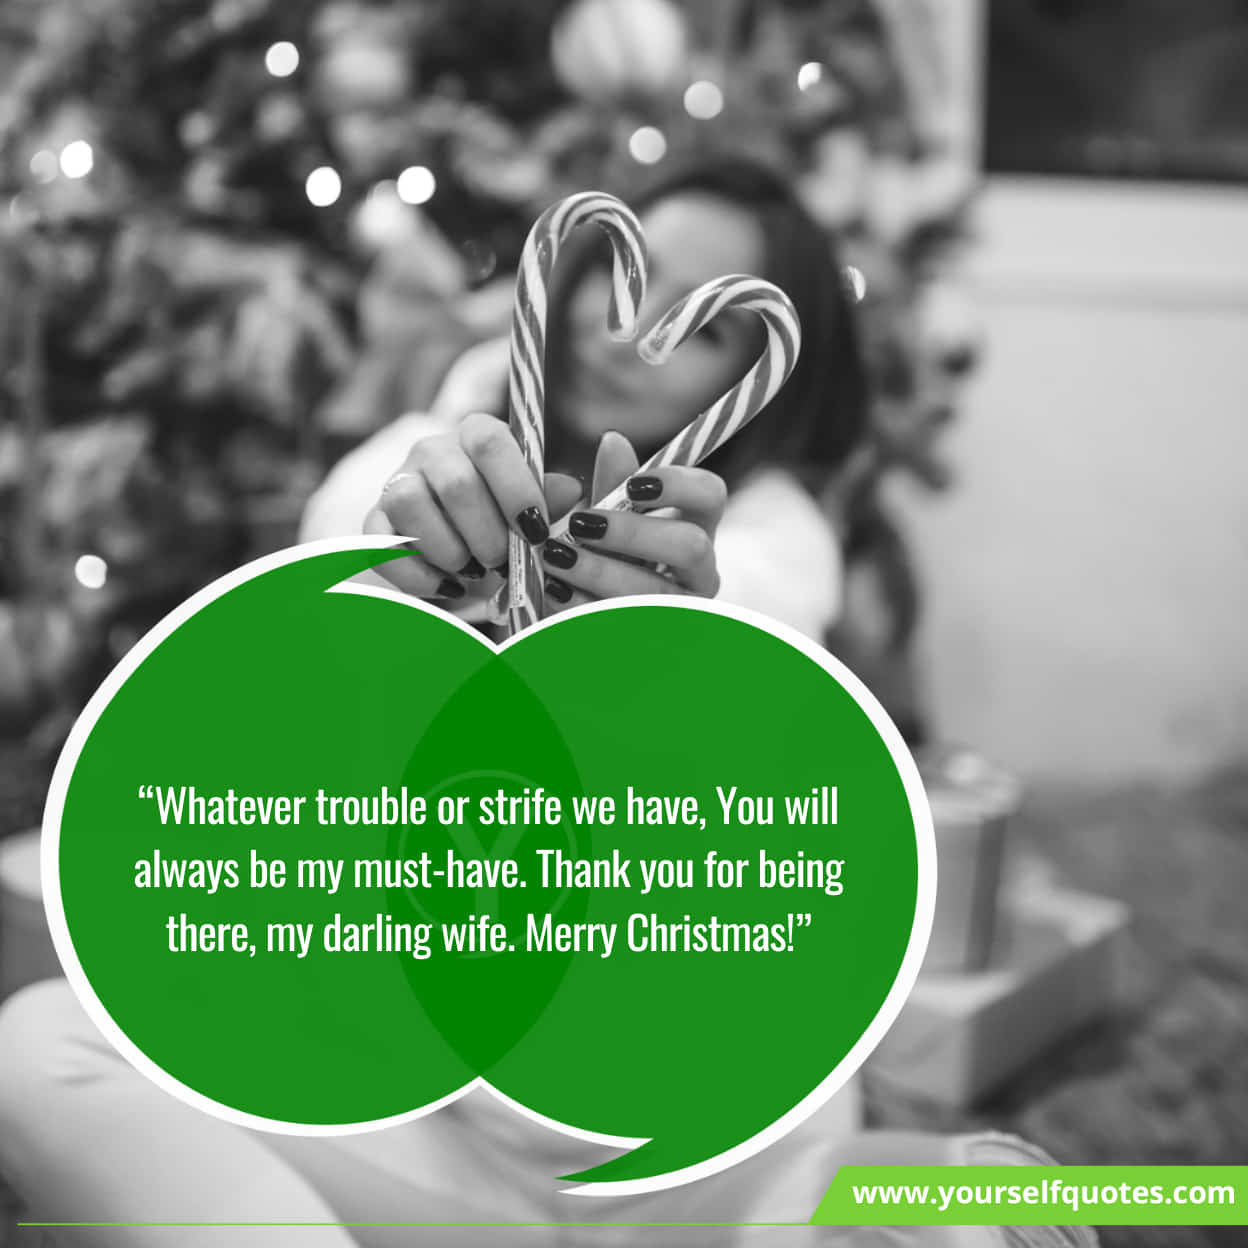 Heart Touching Merry Christmas Wishes for Wife